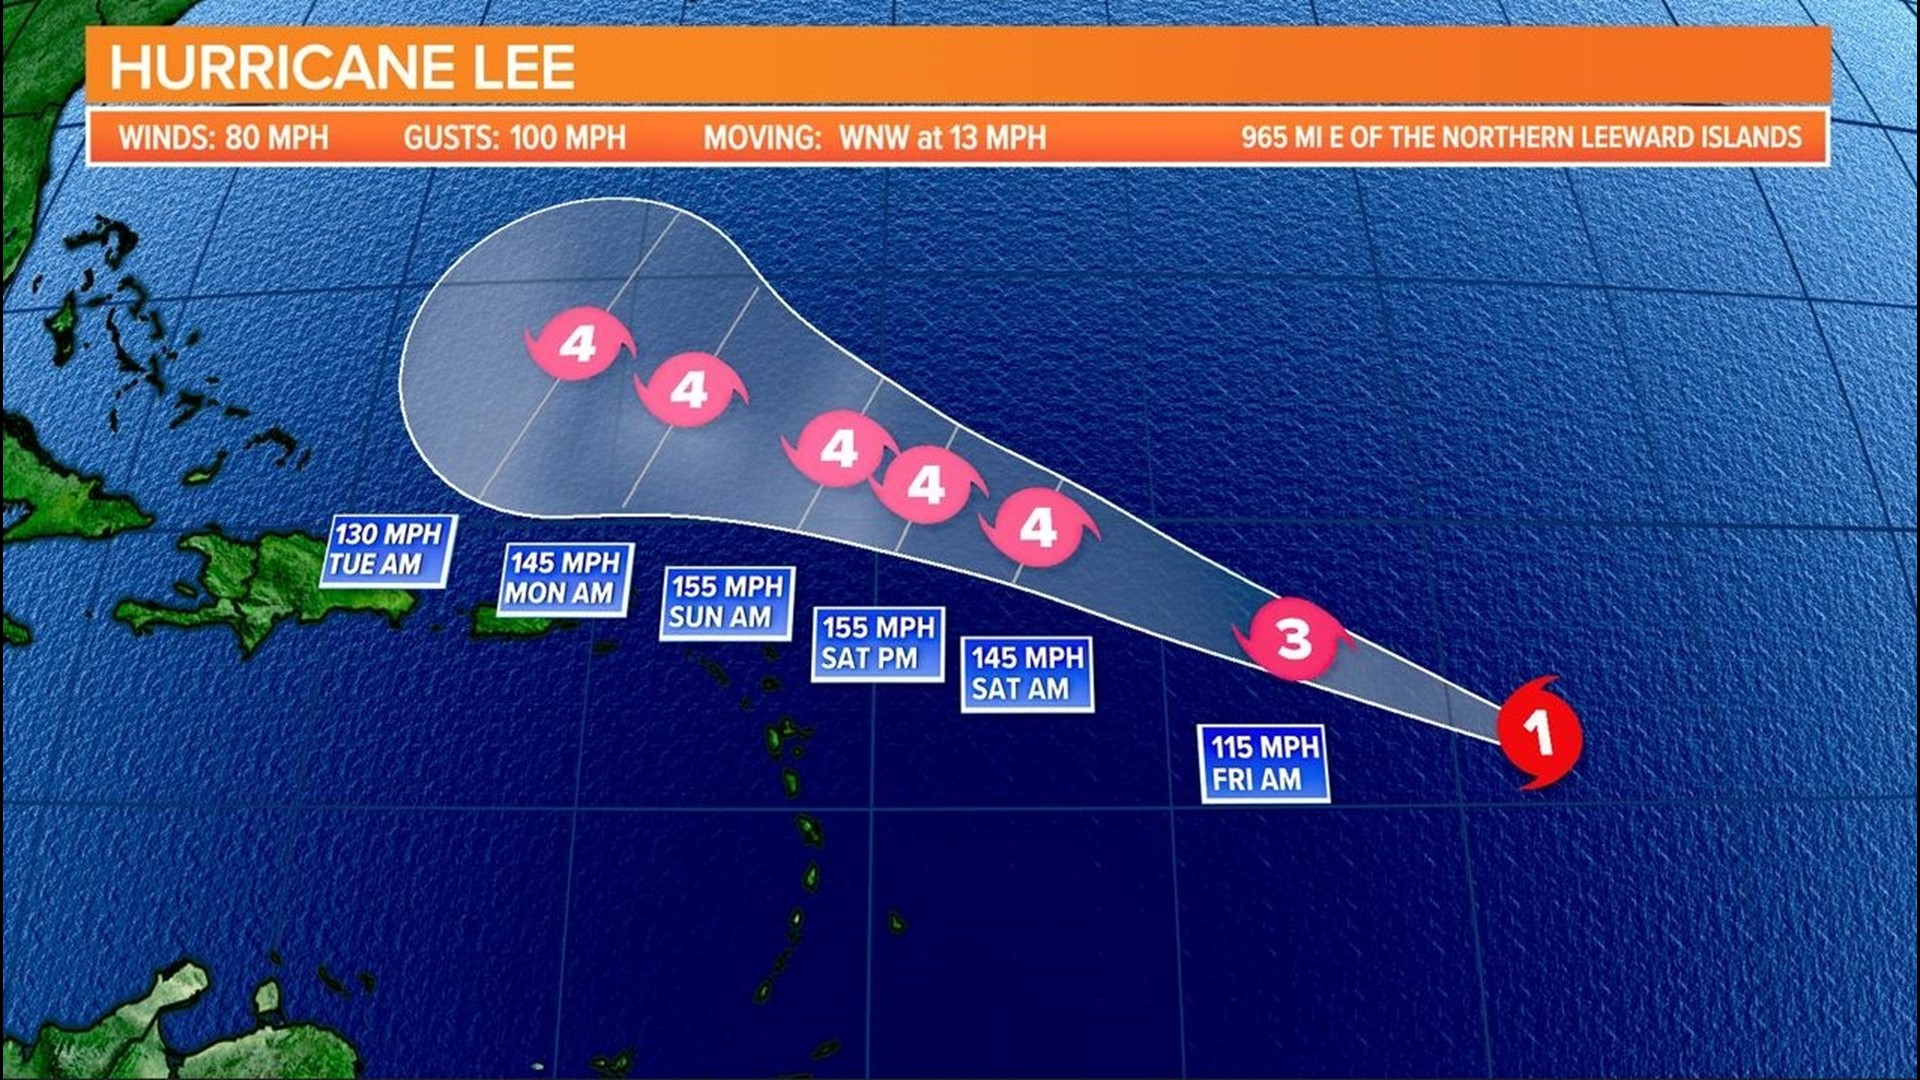 Rapid intensification is expected to begin later today, 
and Lee is forecast to become a major hurricane by early Friday.